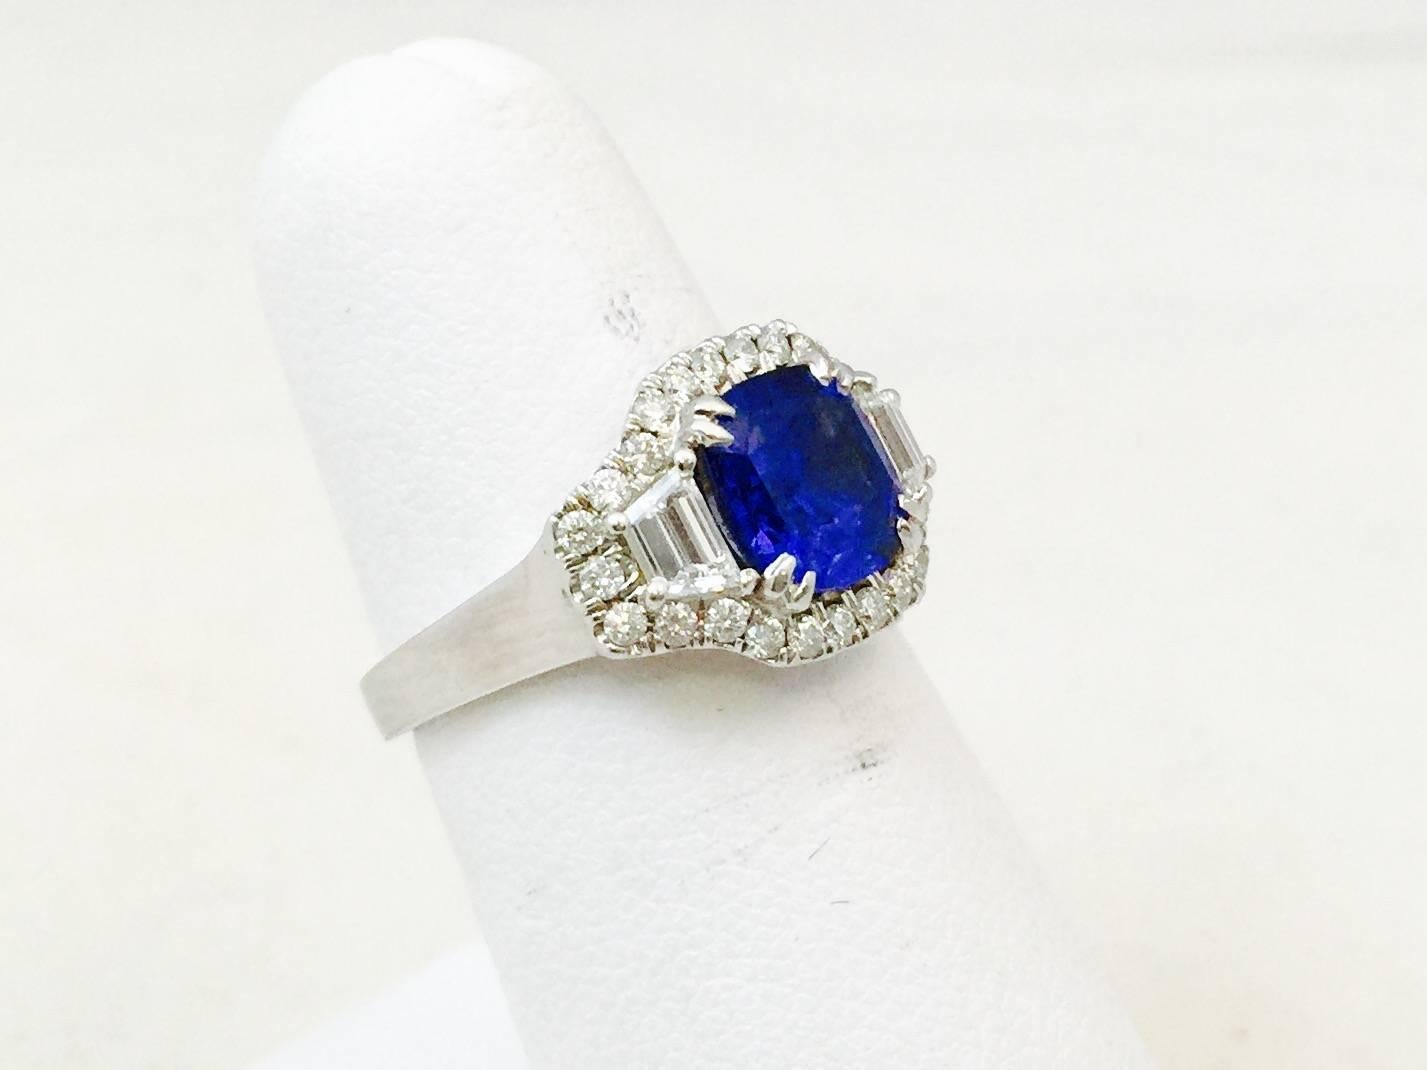 Meticulously crafted in 18 karat white gold boasting a magnificent Cushion Cut Ceylon Sapphire weighing 2.40 carats. Enhanced on each side is a Trapezoid cut white diamond with 0.45 carats total having F color, VS clarity.  Complimented by a